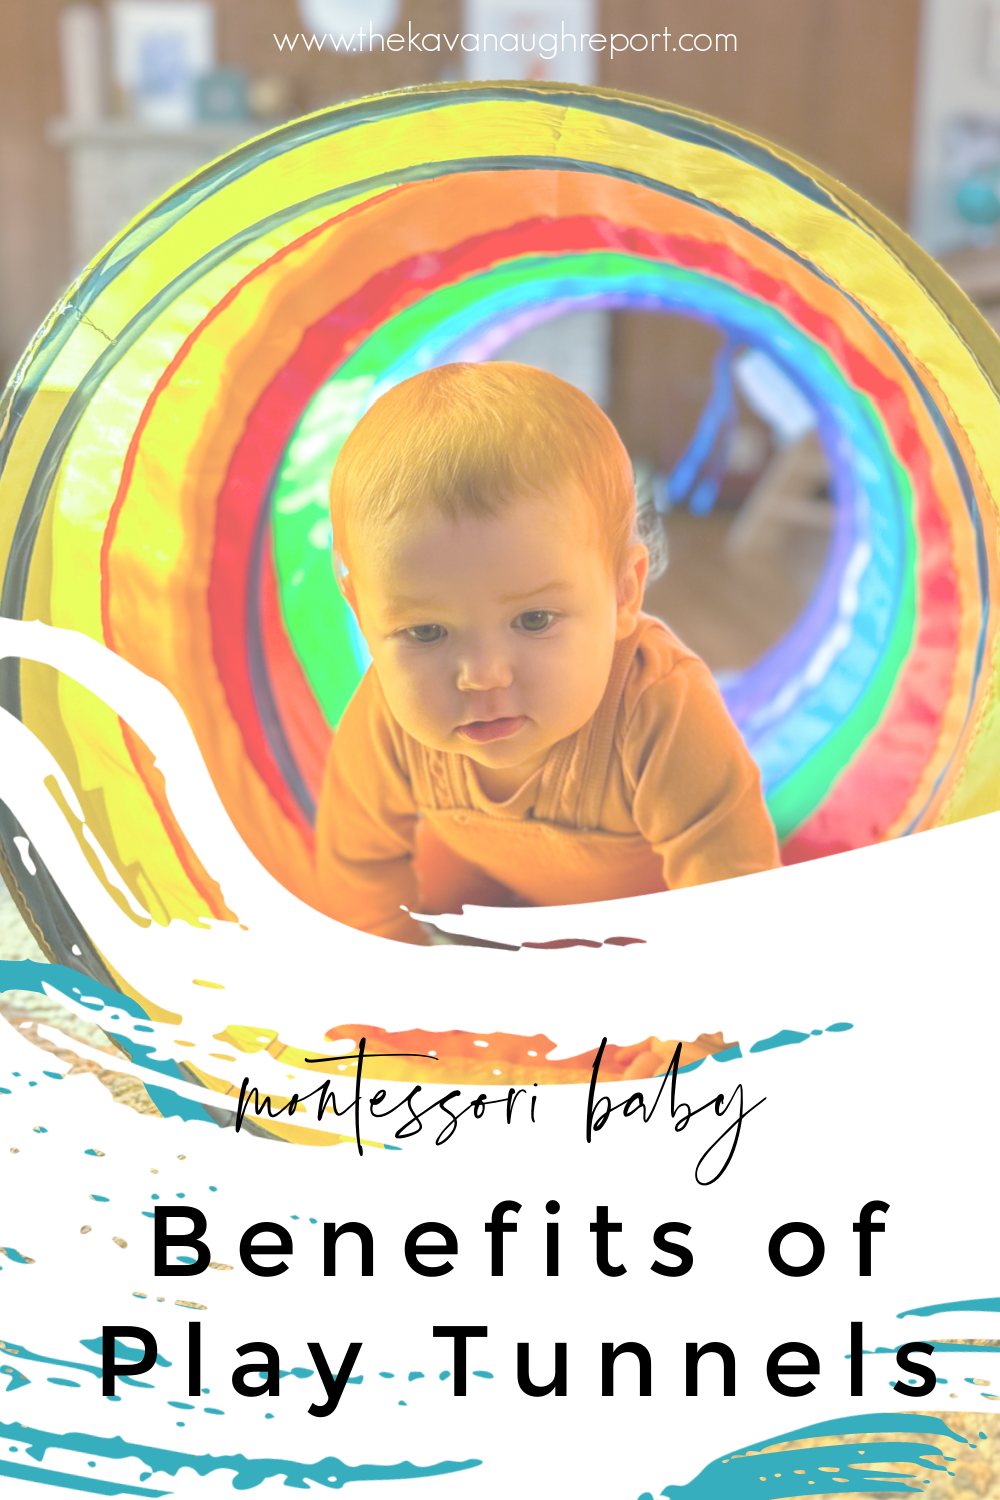 There are many sensory and movement benefits to adding a play tunnel to your Montessori home. Read about why this gross motor toy is perfect for your Montessori baby!